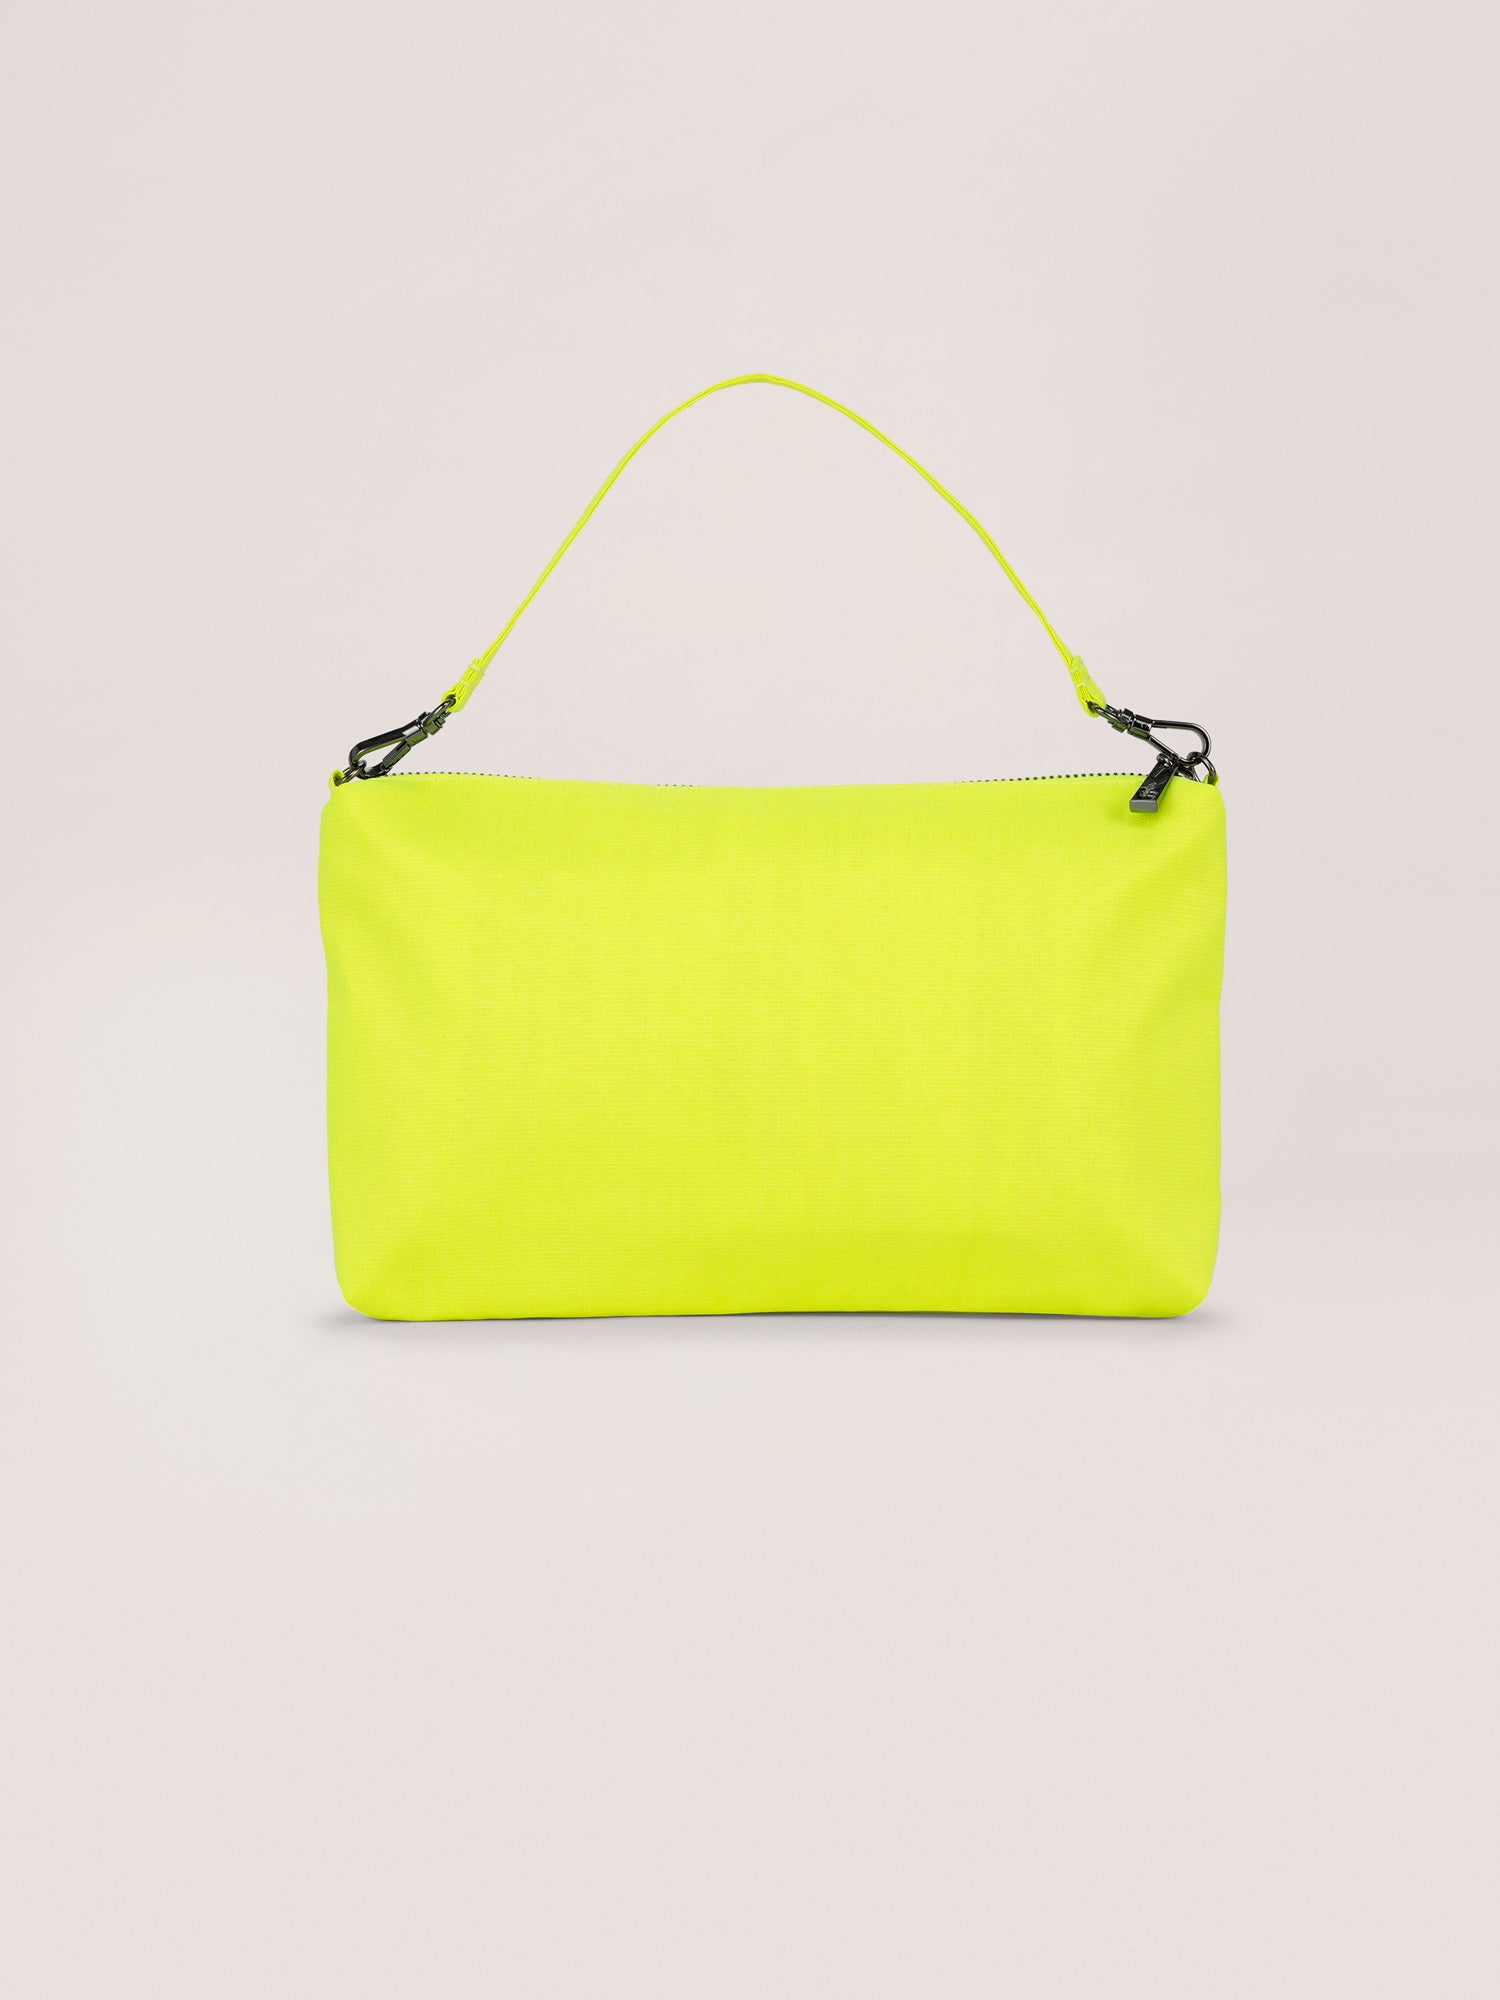 Neon Yellow Be Quick Crossbody Bag Back View with Short Strap